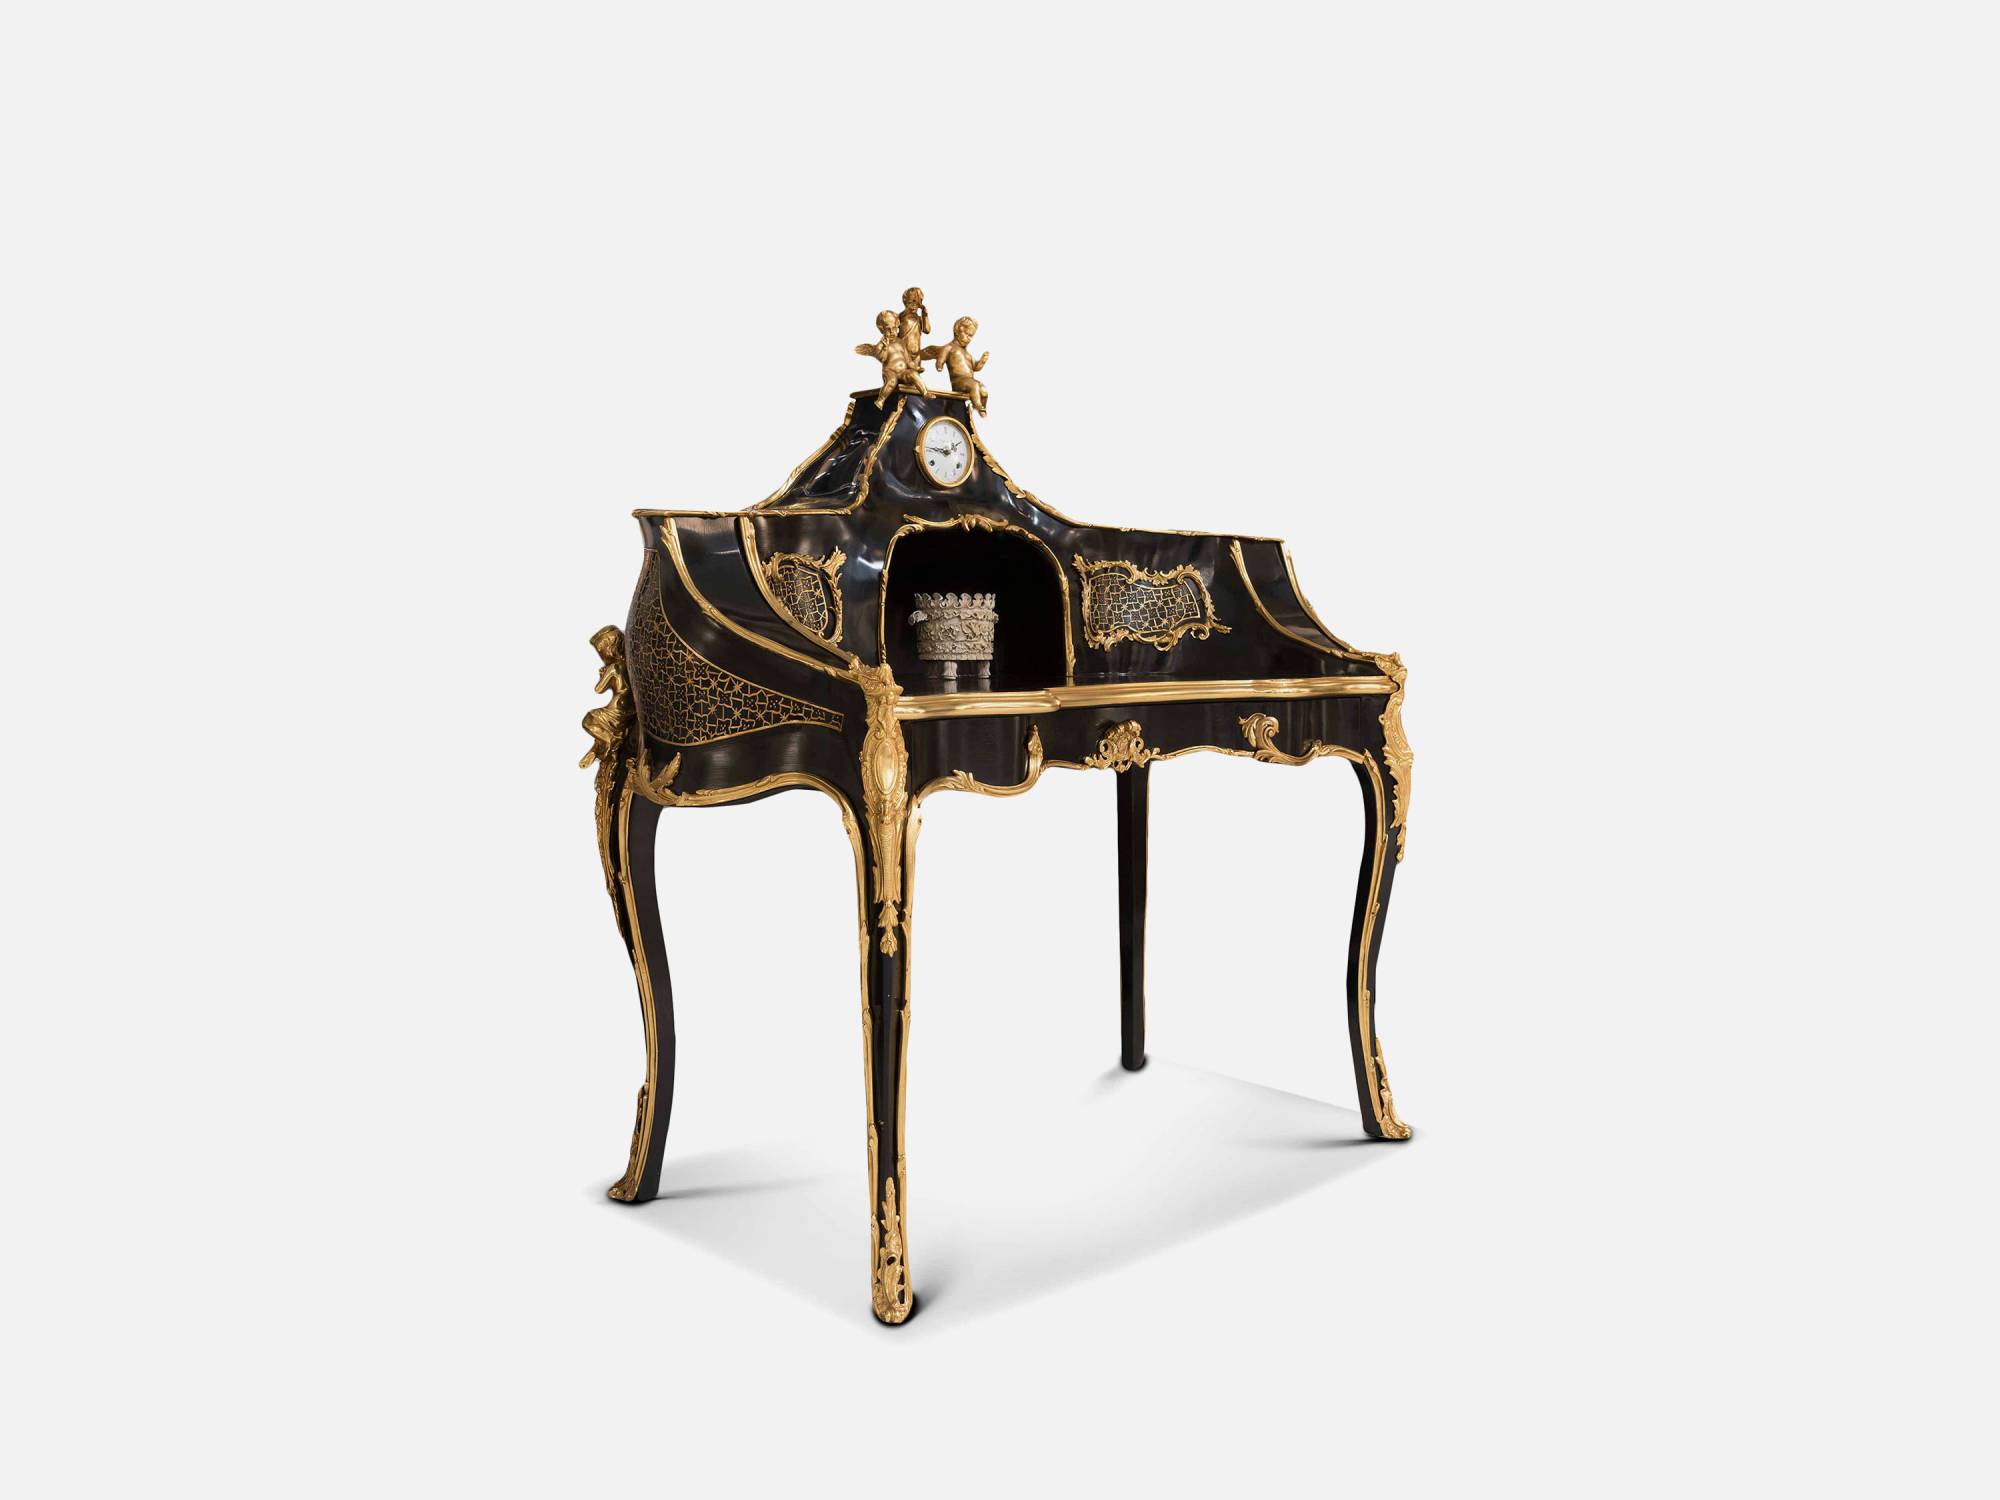 ART. 1515-19 - C.G. Capelletti quality furniture with made in Italy contemporary Desks and writing desks